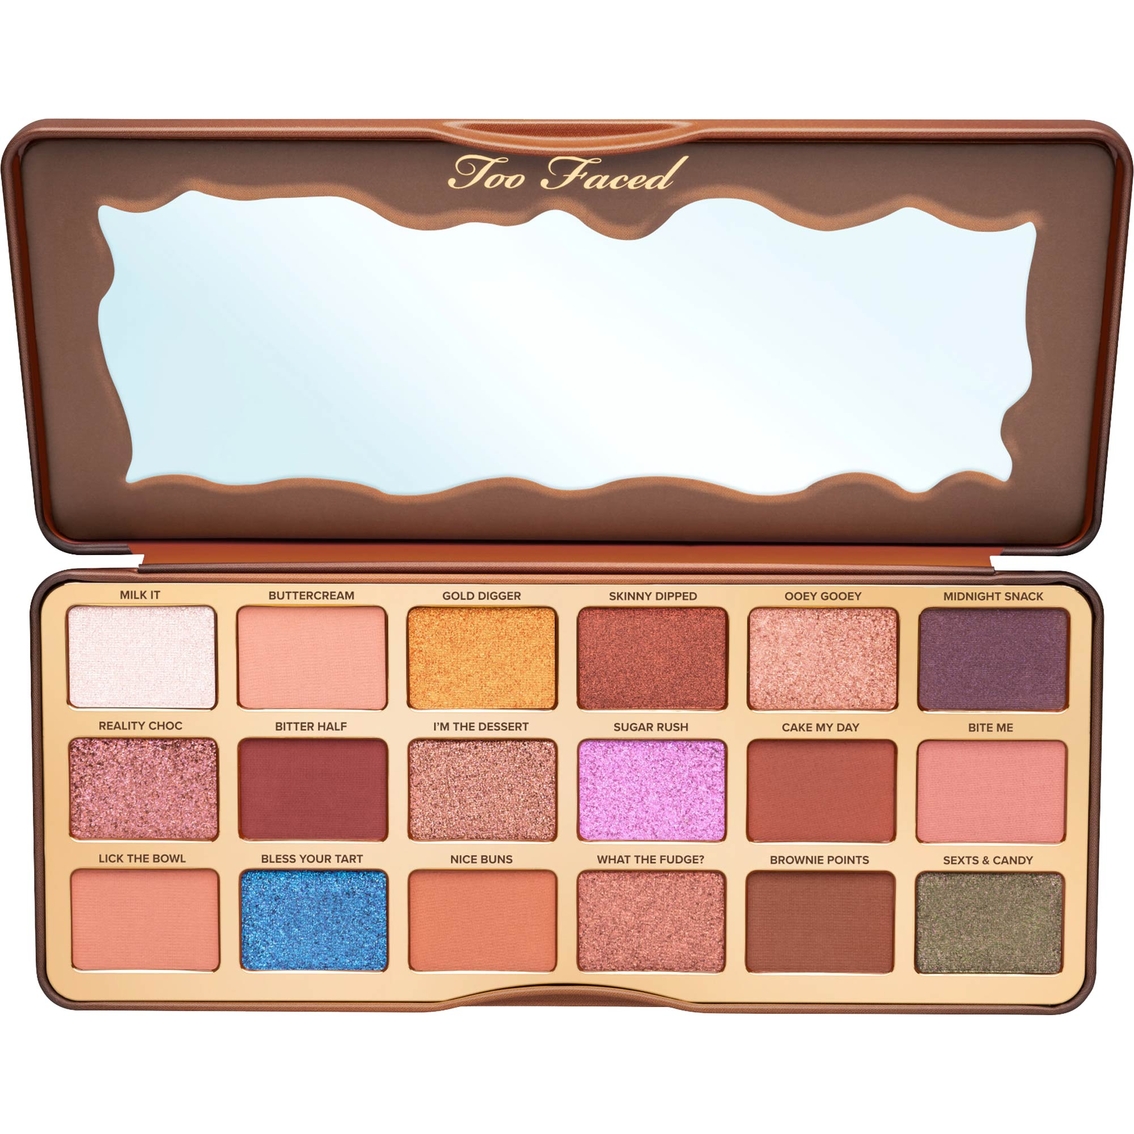 Too Faced Better Than Chocolate Cocoa-Infused Eye Shadow Palette - Image 2 of 3